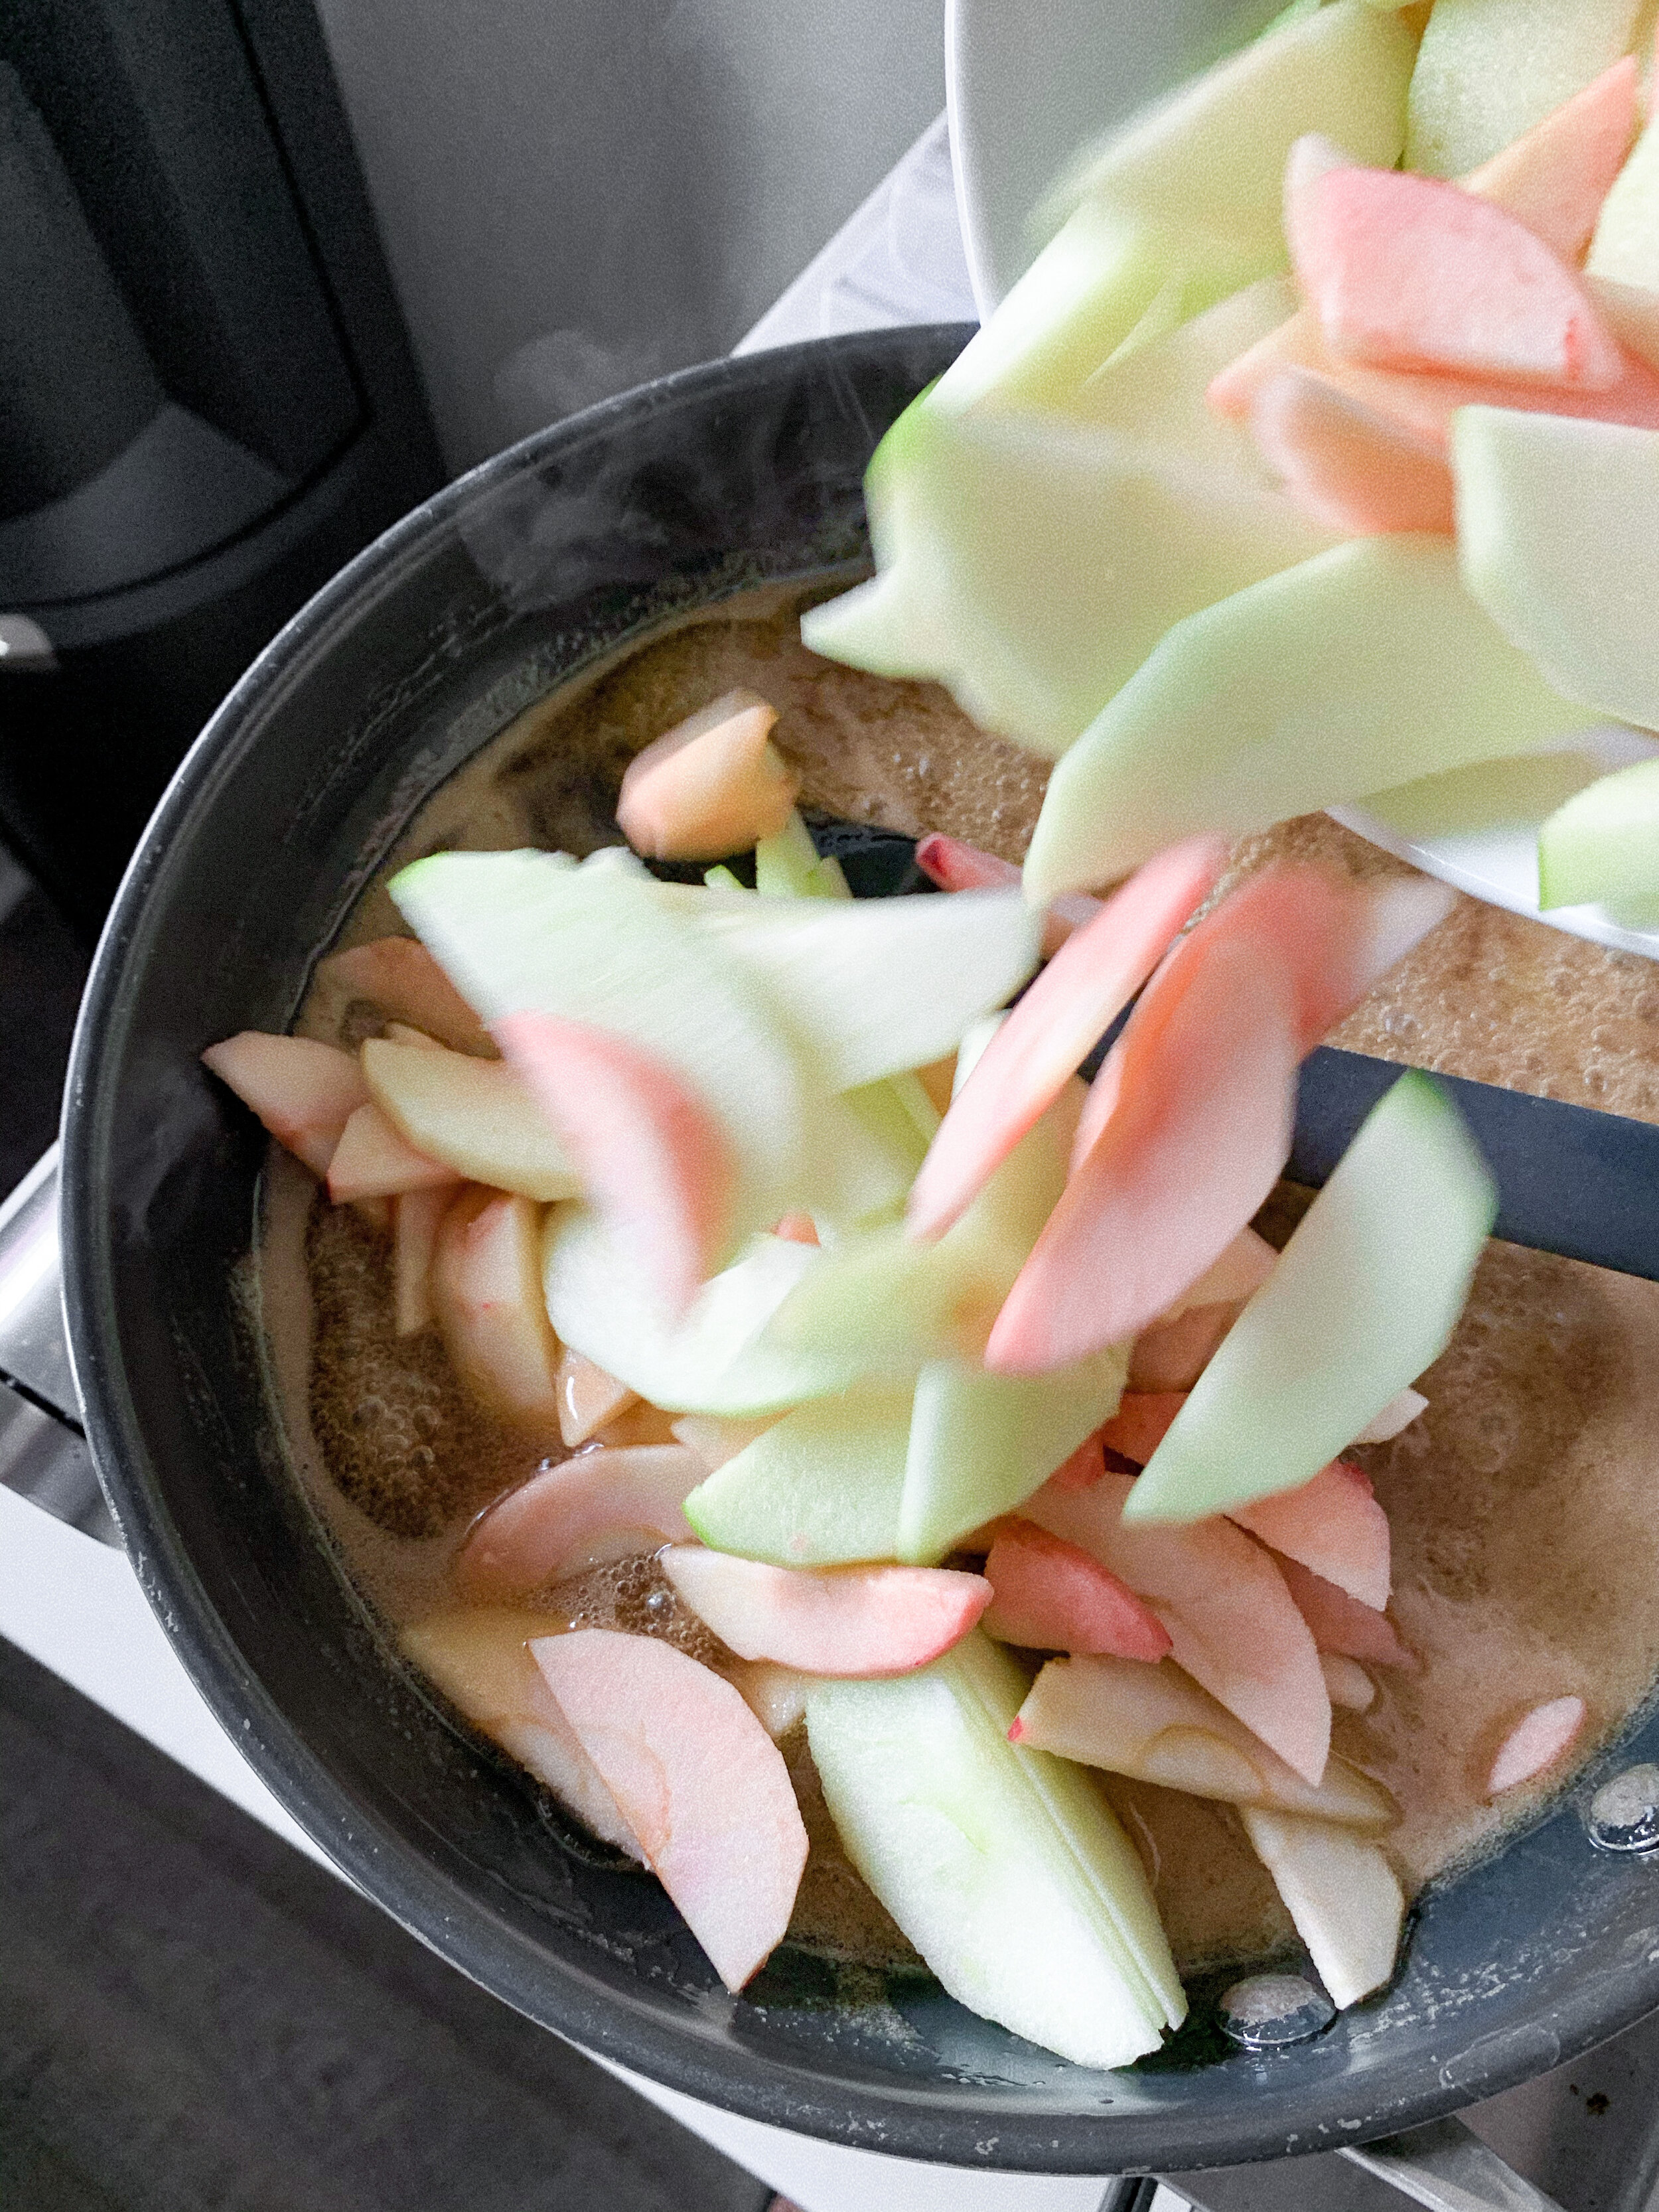 Add the sliced apples to the maple/butter mixture